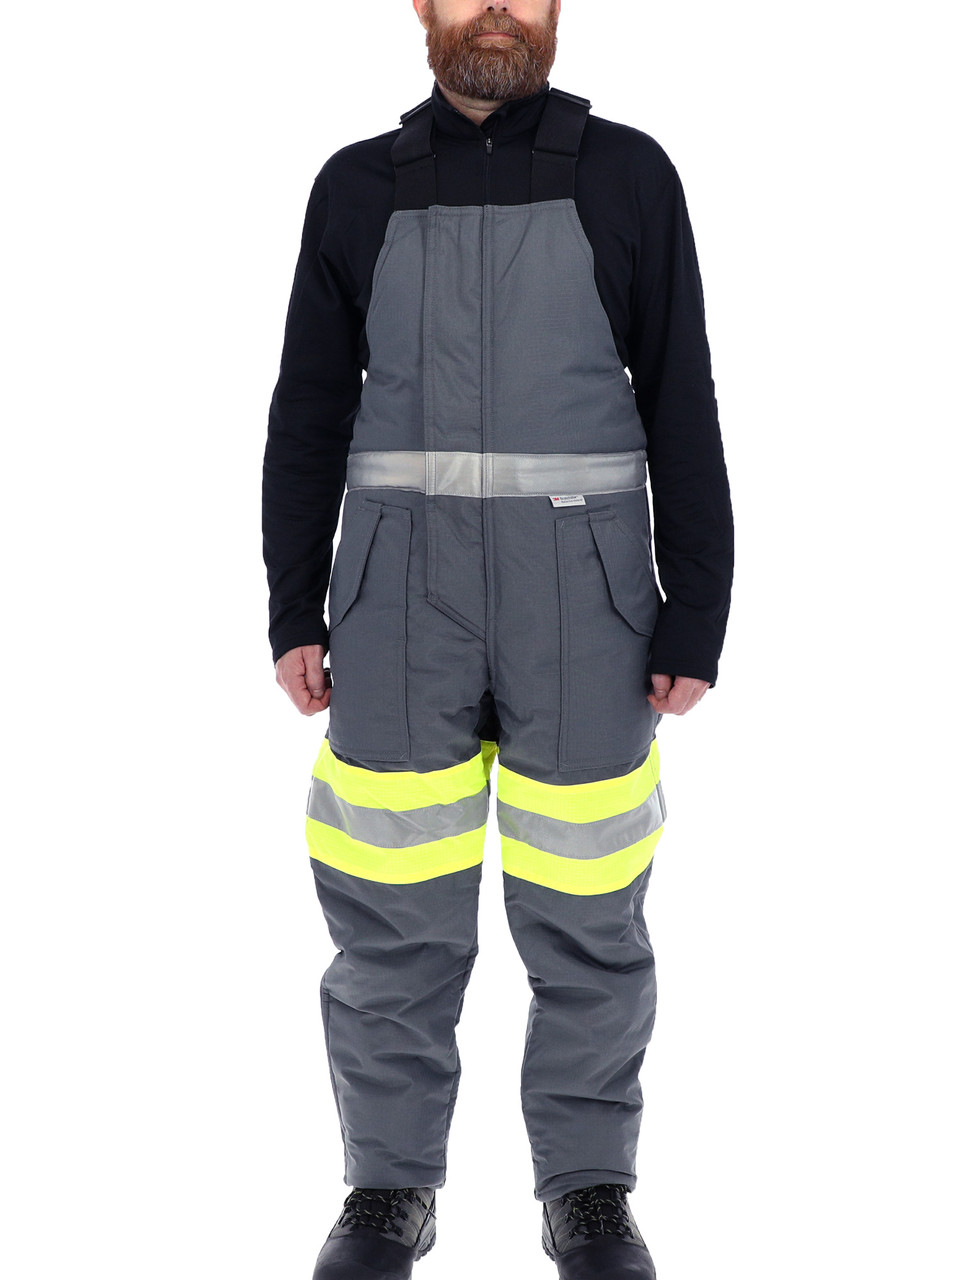 PolarForce® Bib Overalls (7140), Rated for -40°F